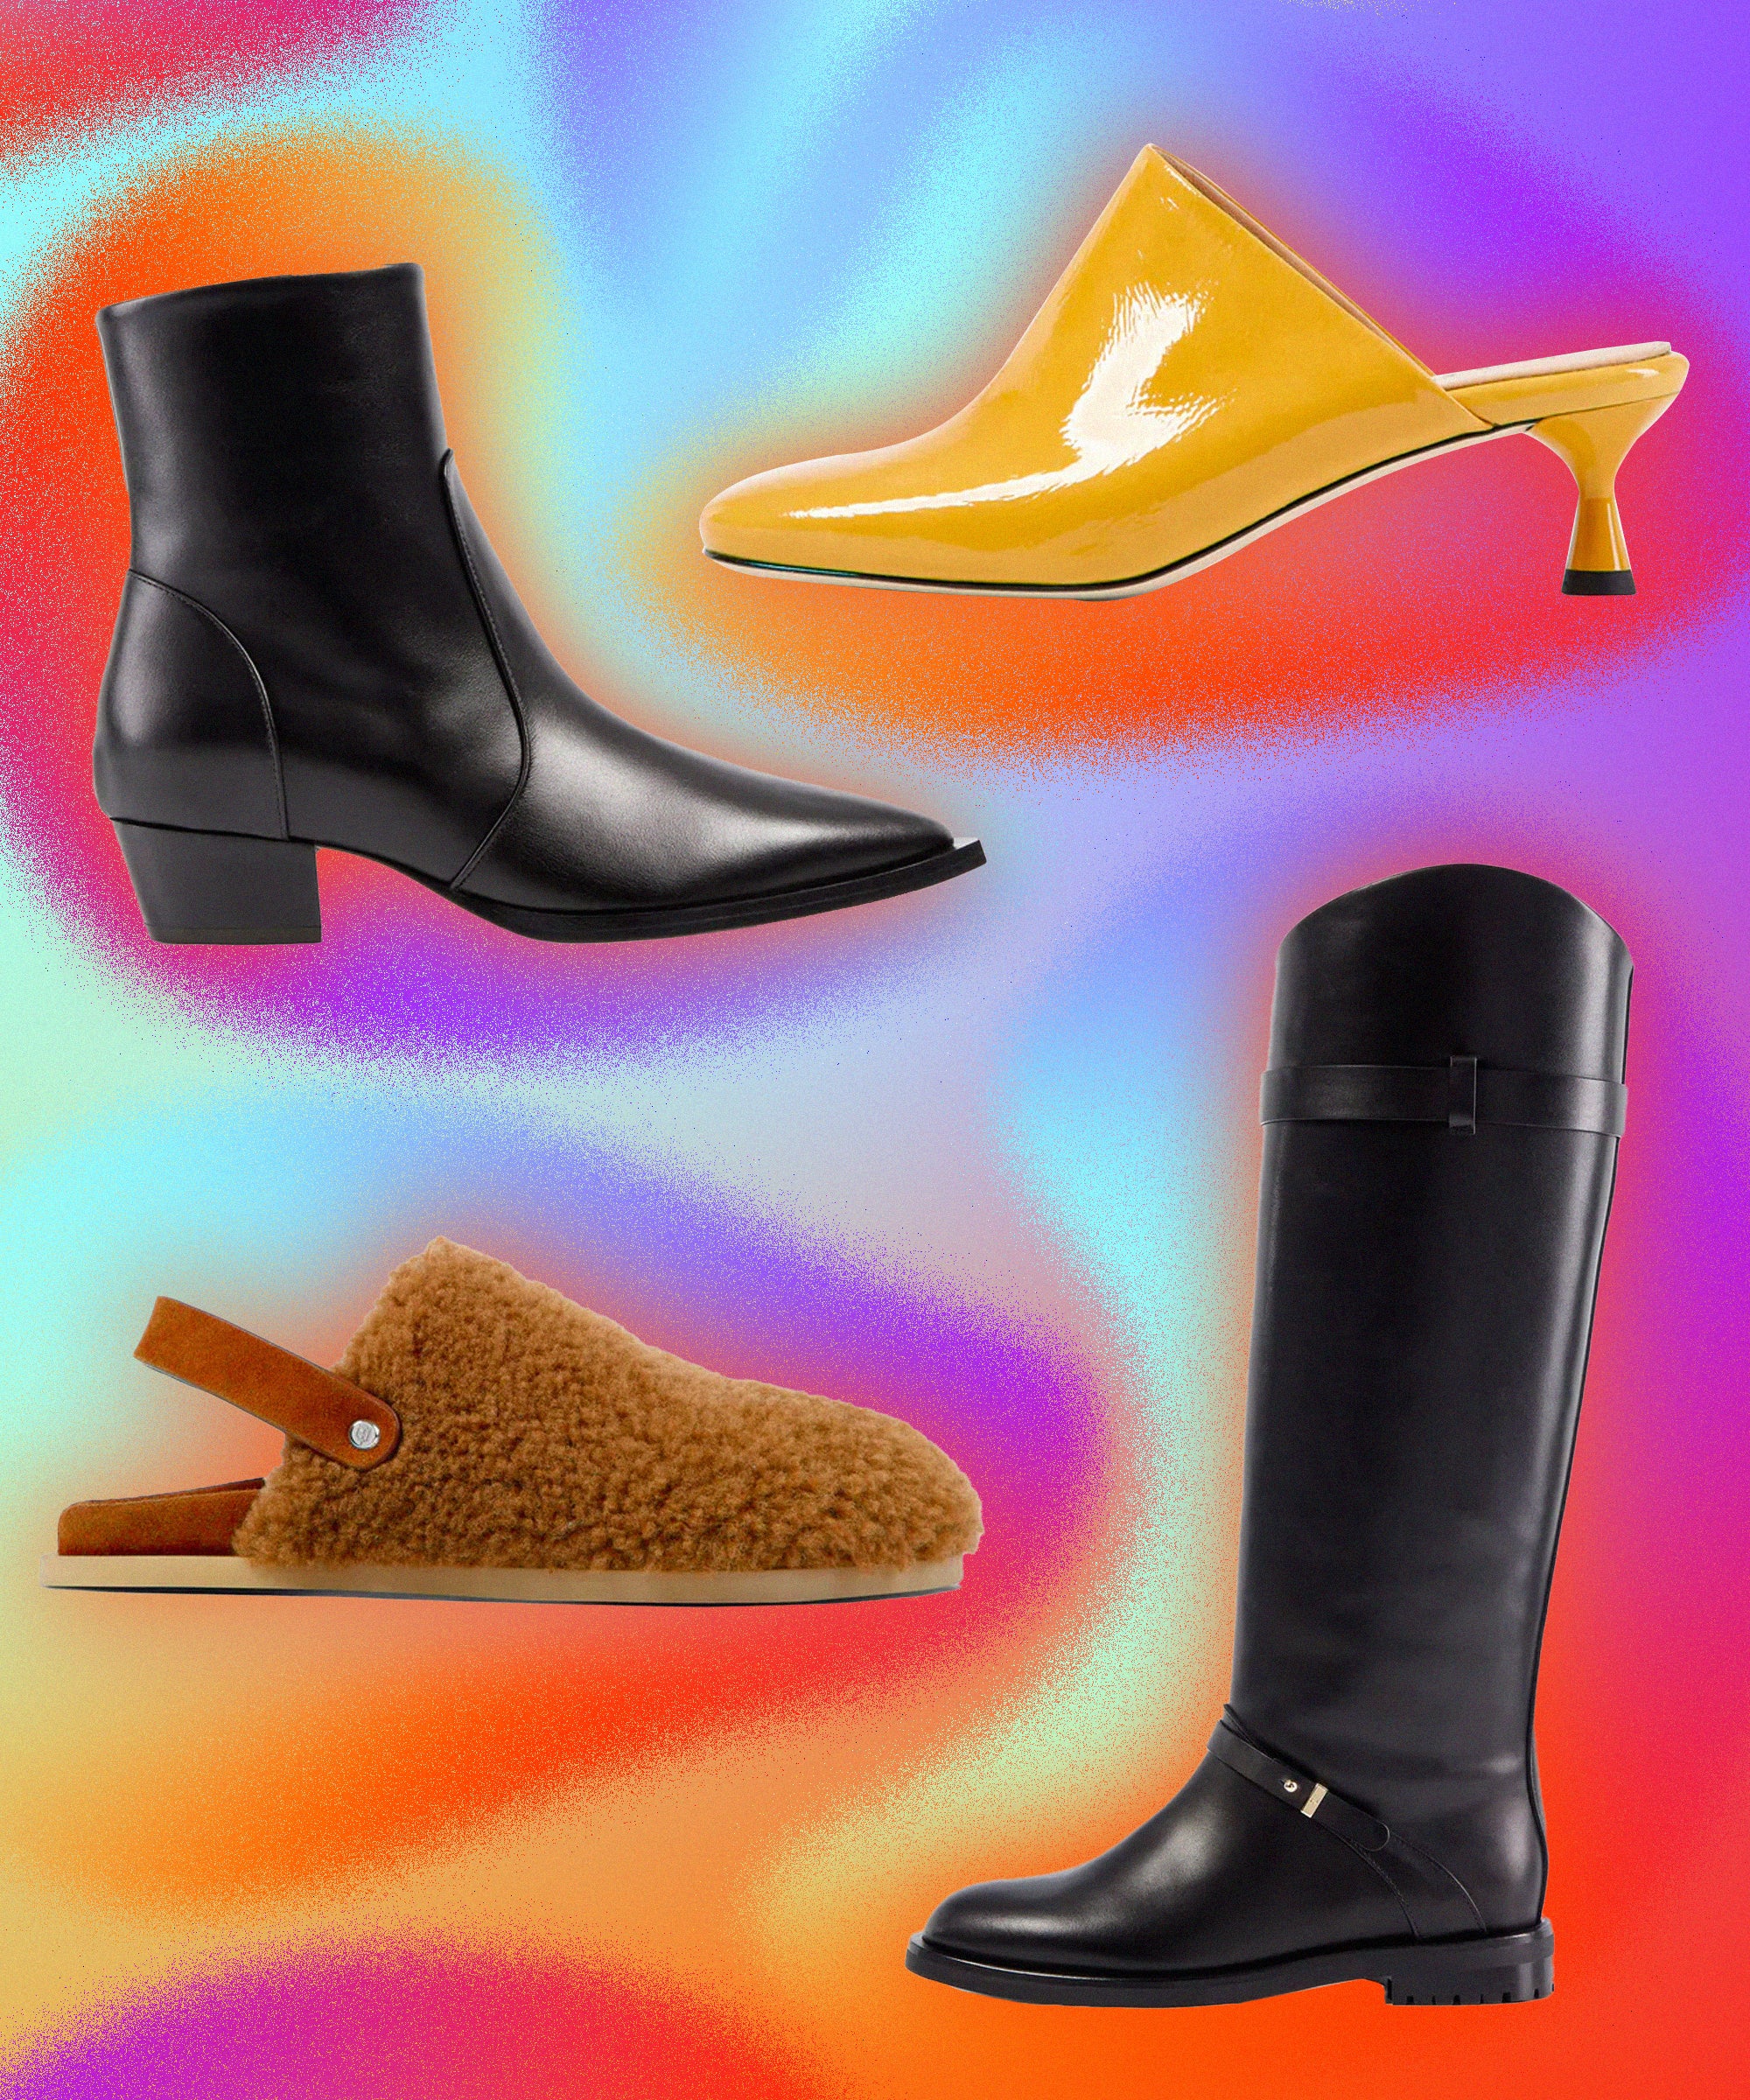 The Tall Boot Trends We Love (+ How To Wear Them and Our Picks